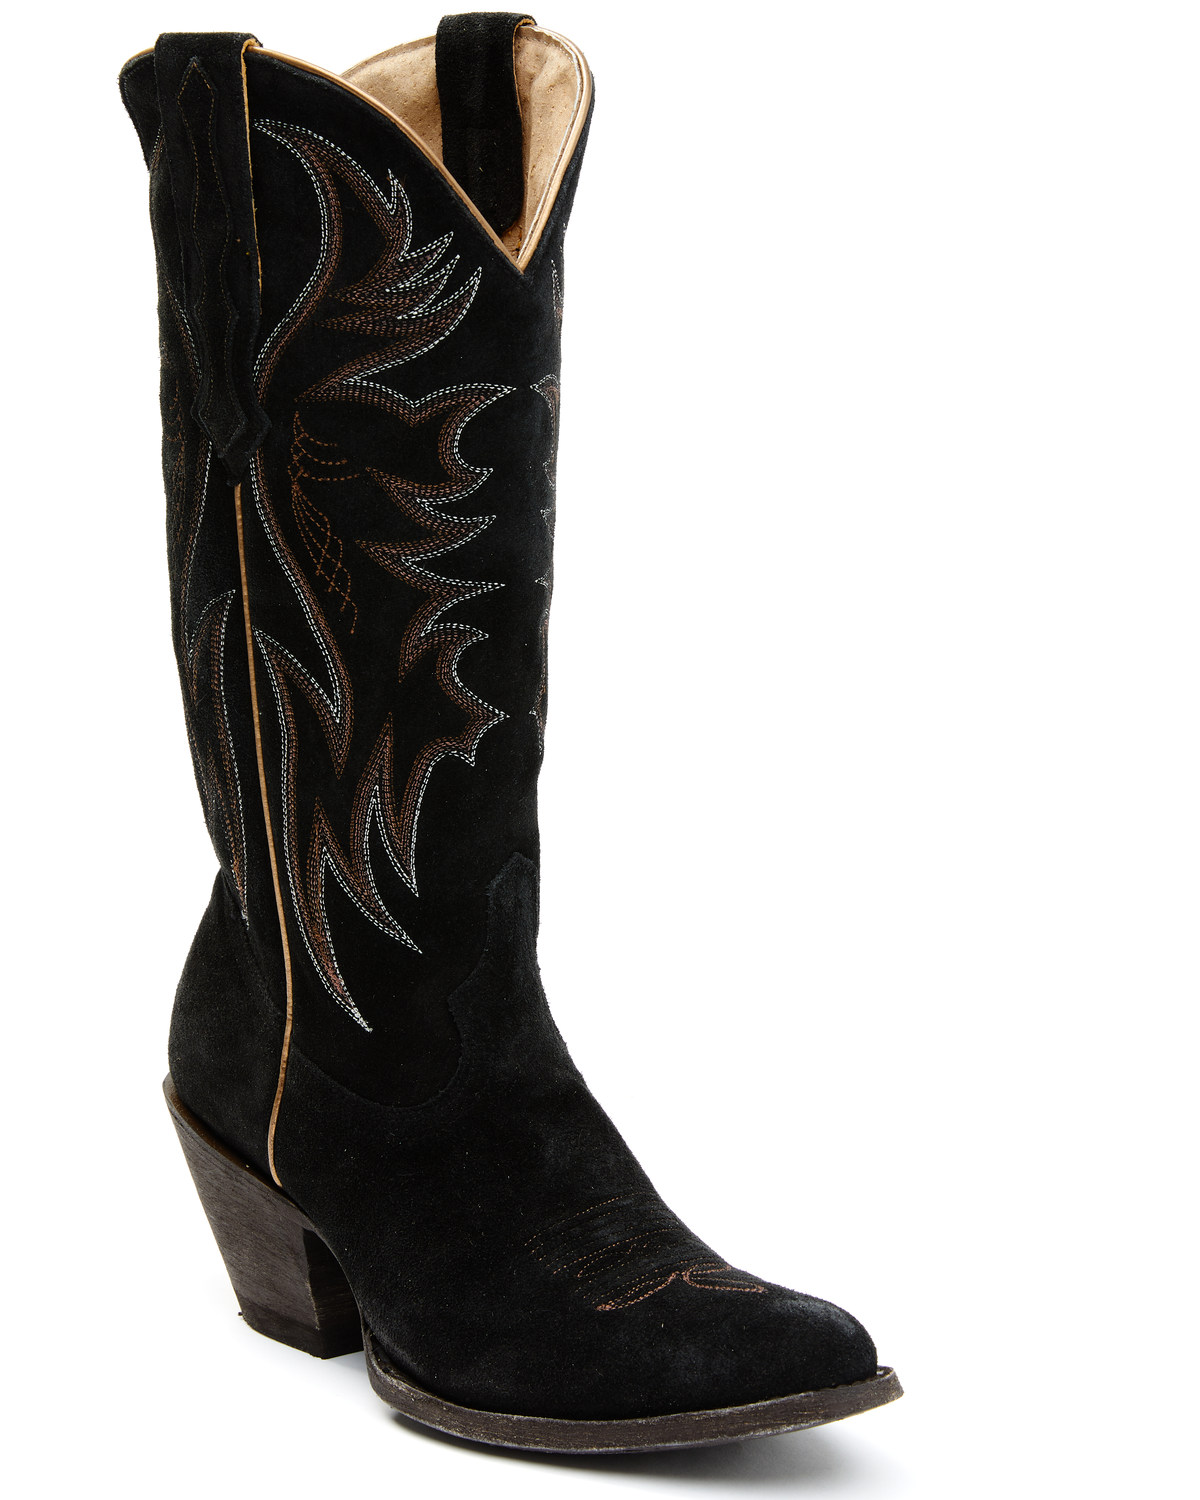 Idyllwind Women's Charmed Life Western Boots